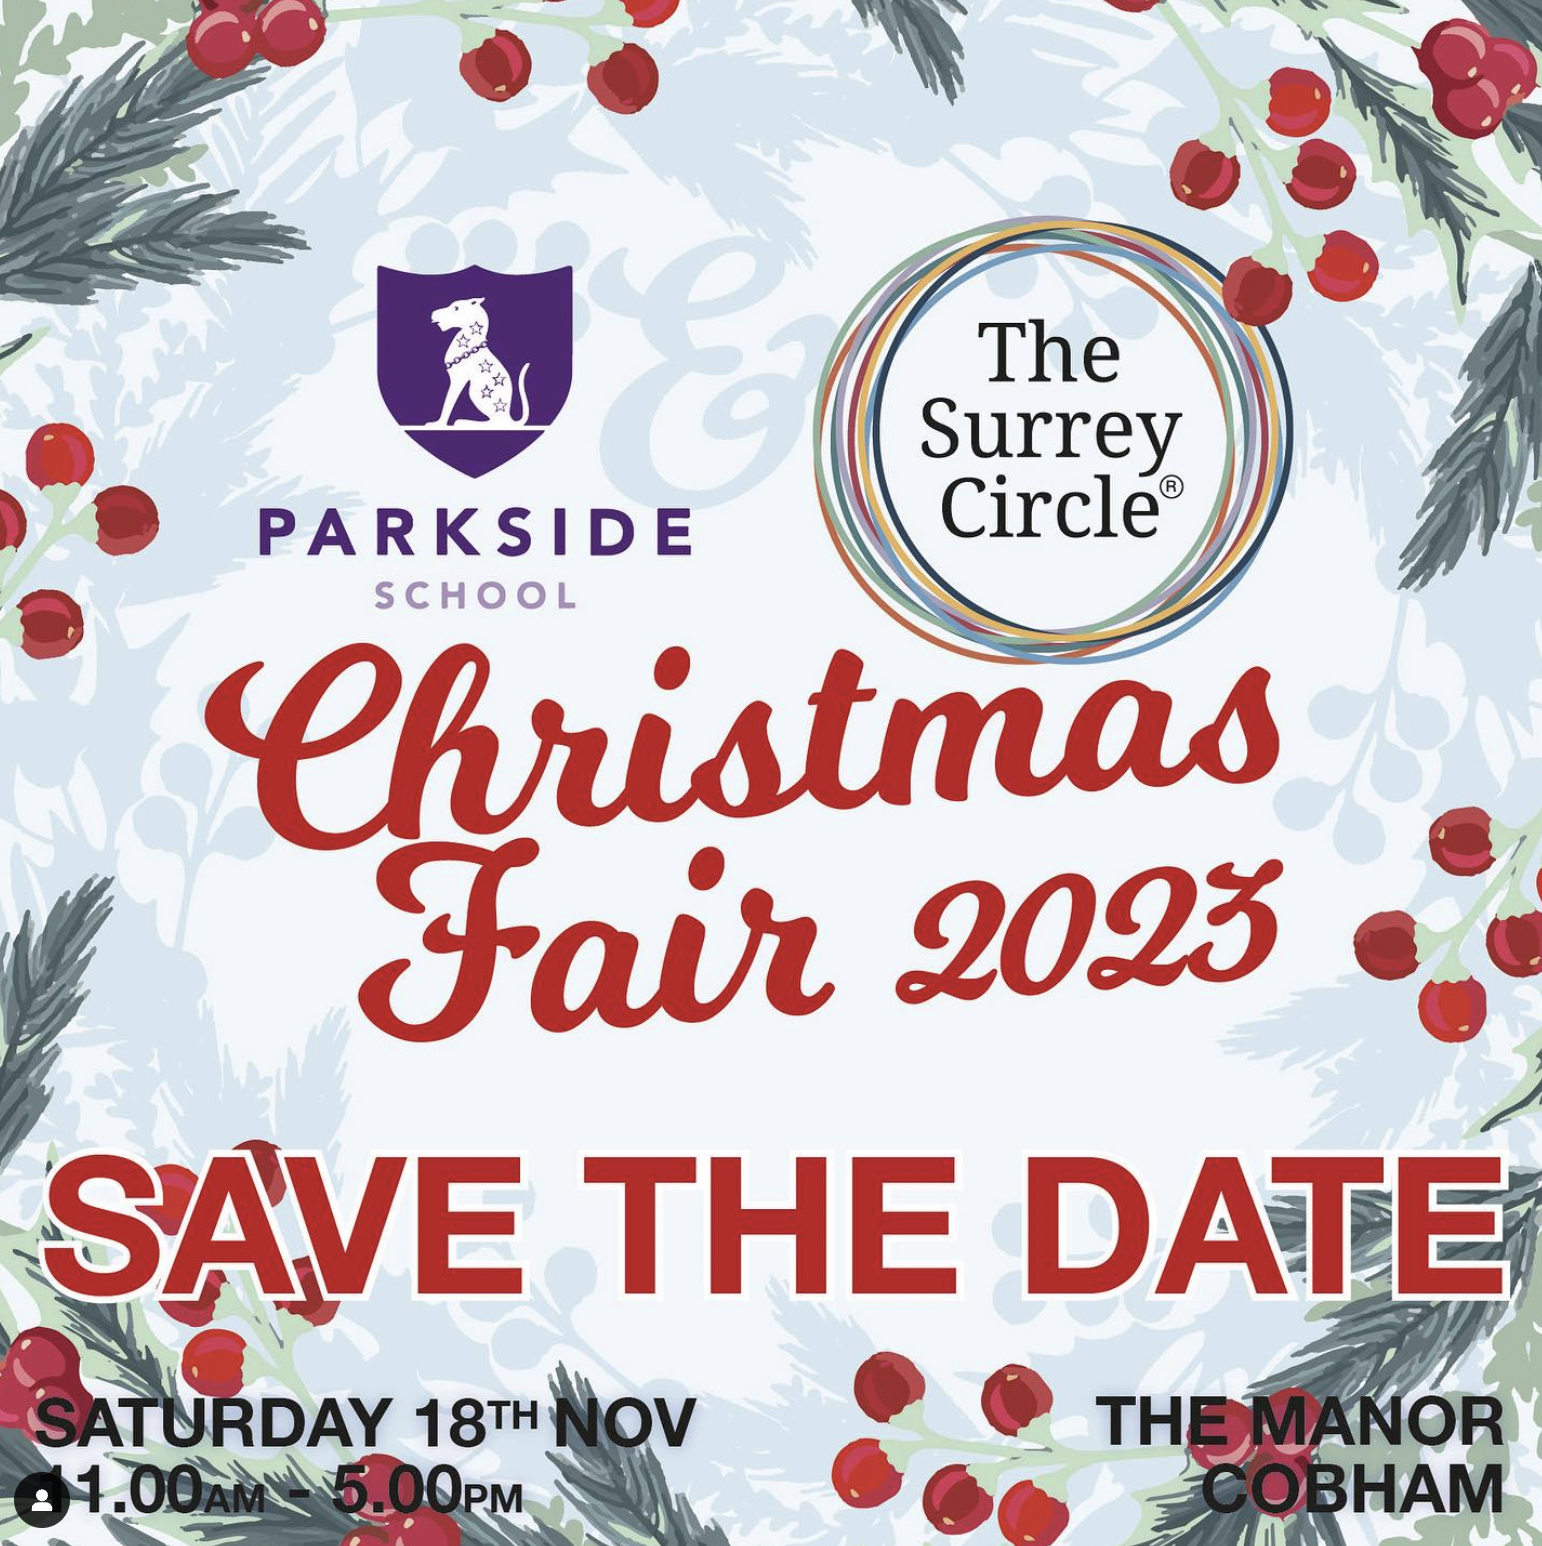 The Surrey Circle Christmas Fair Save the Date image